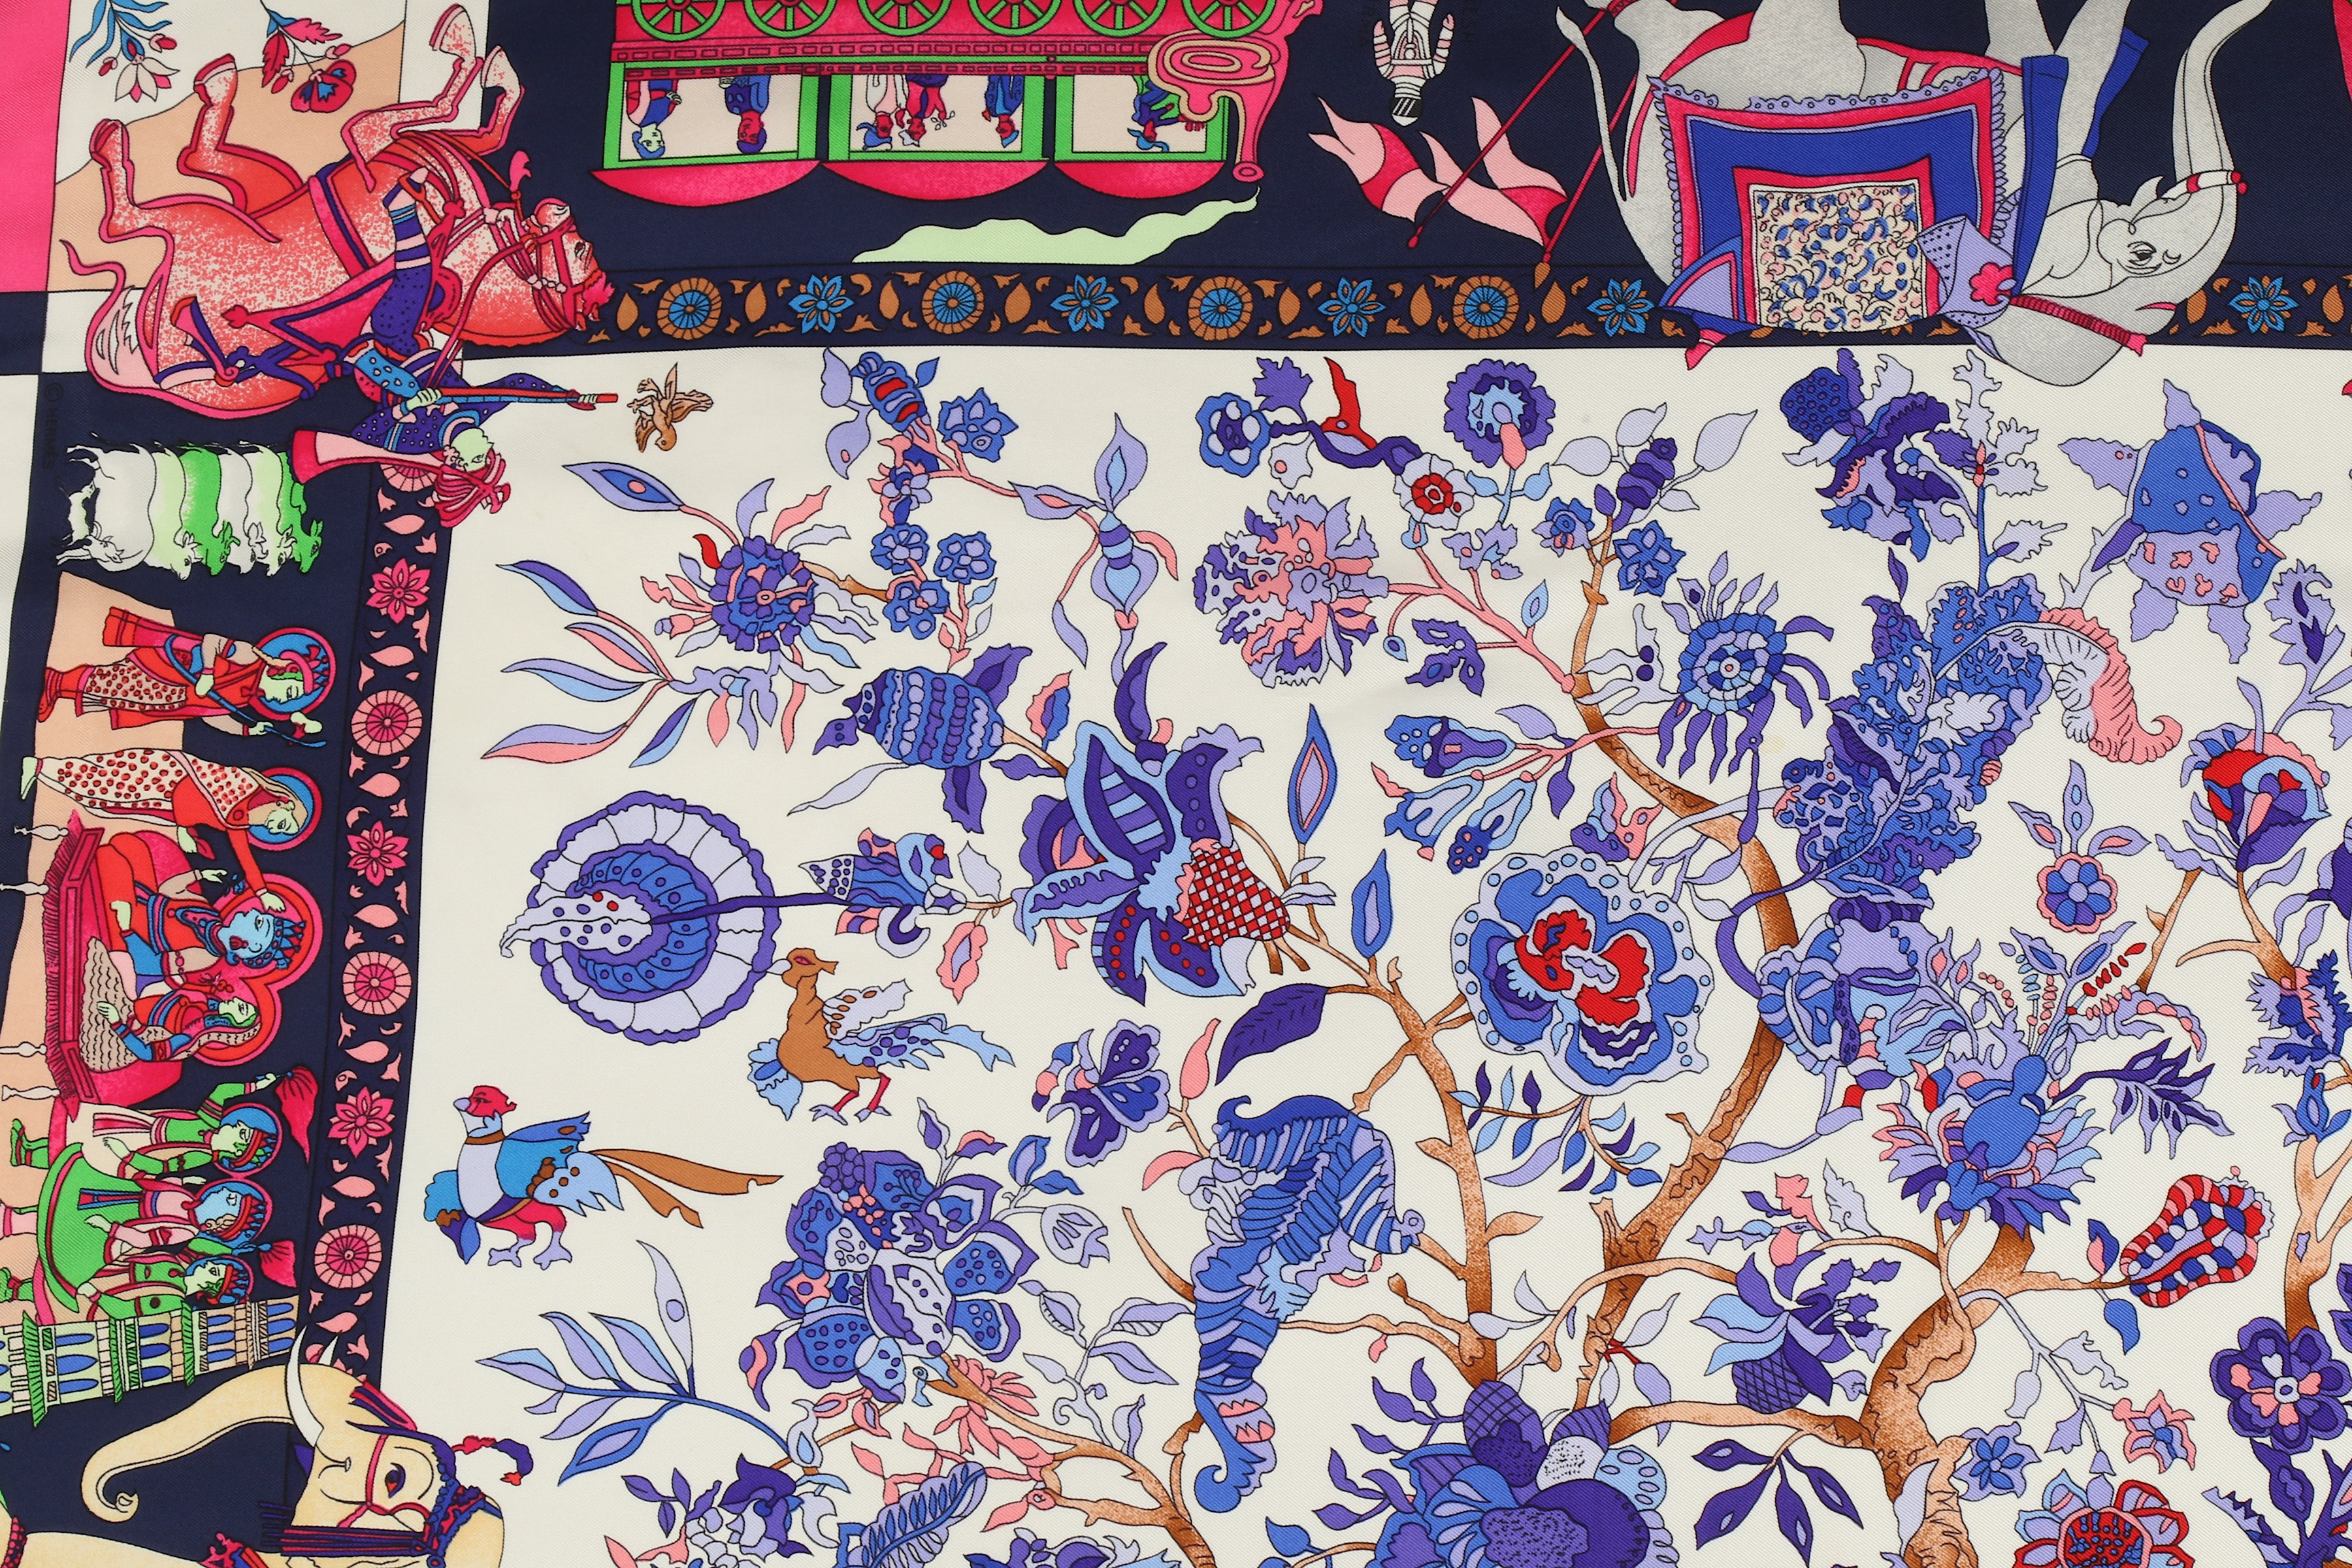 Hermes 'Fantaisies Indiennes' Silk Scarf, designed in 1987 by Loic Dubigeon, indigo border on - Image 2 of 4